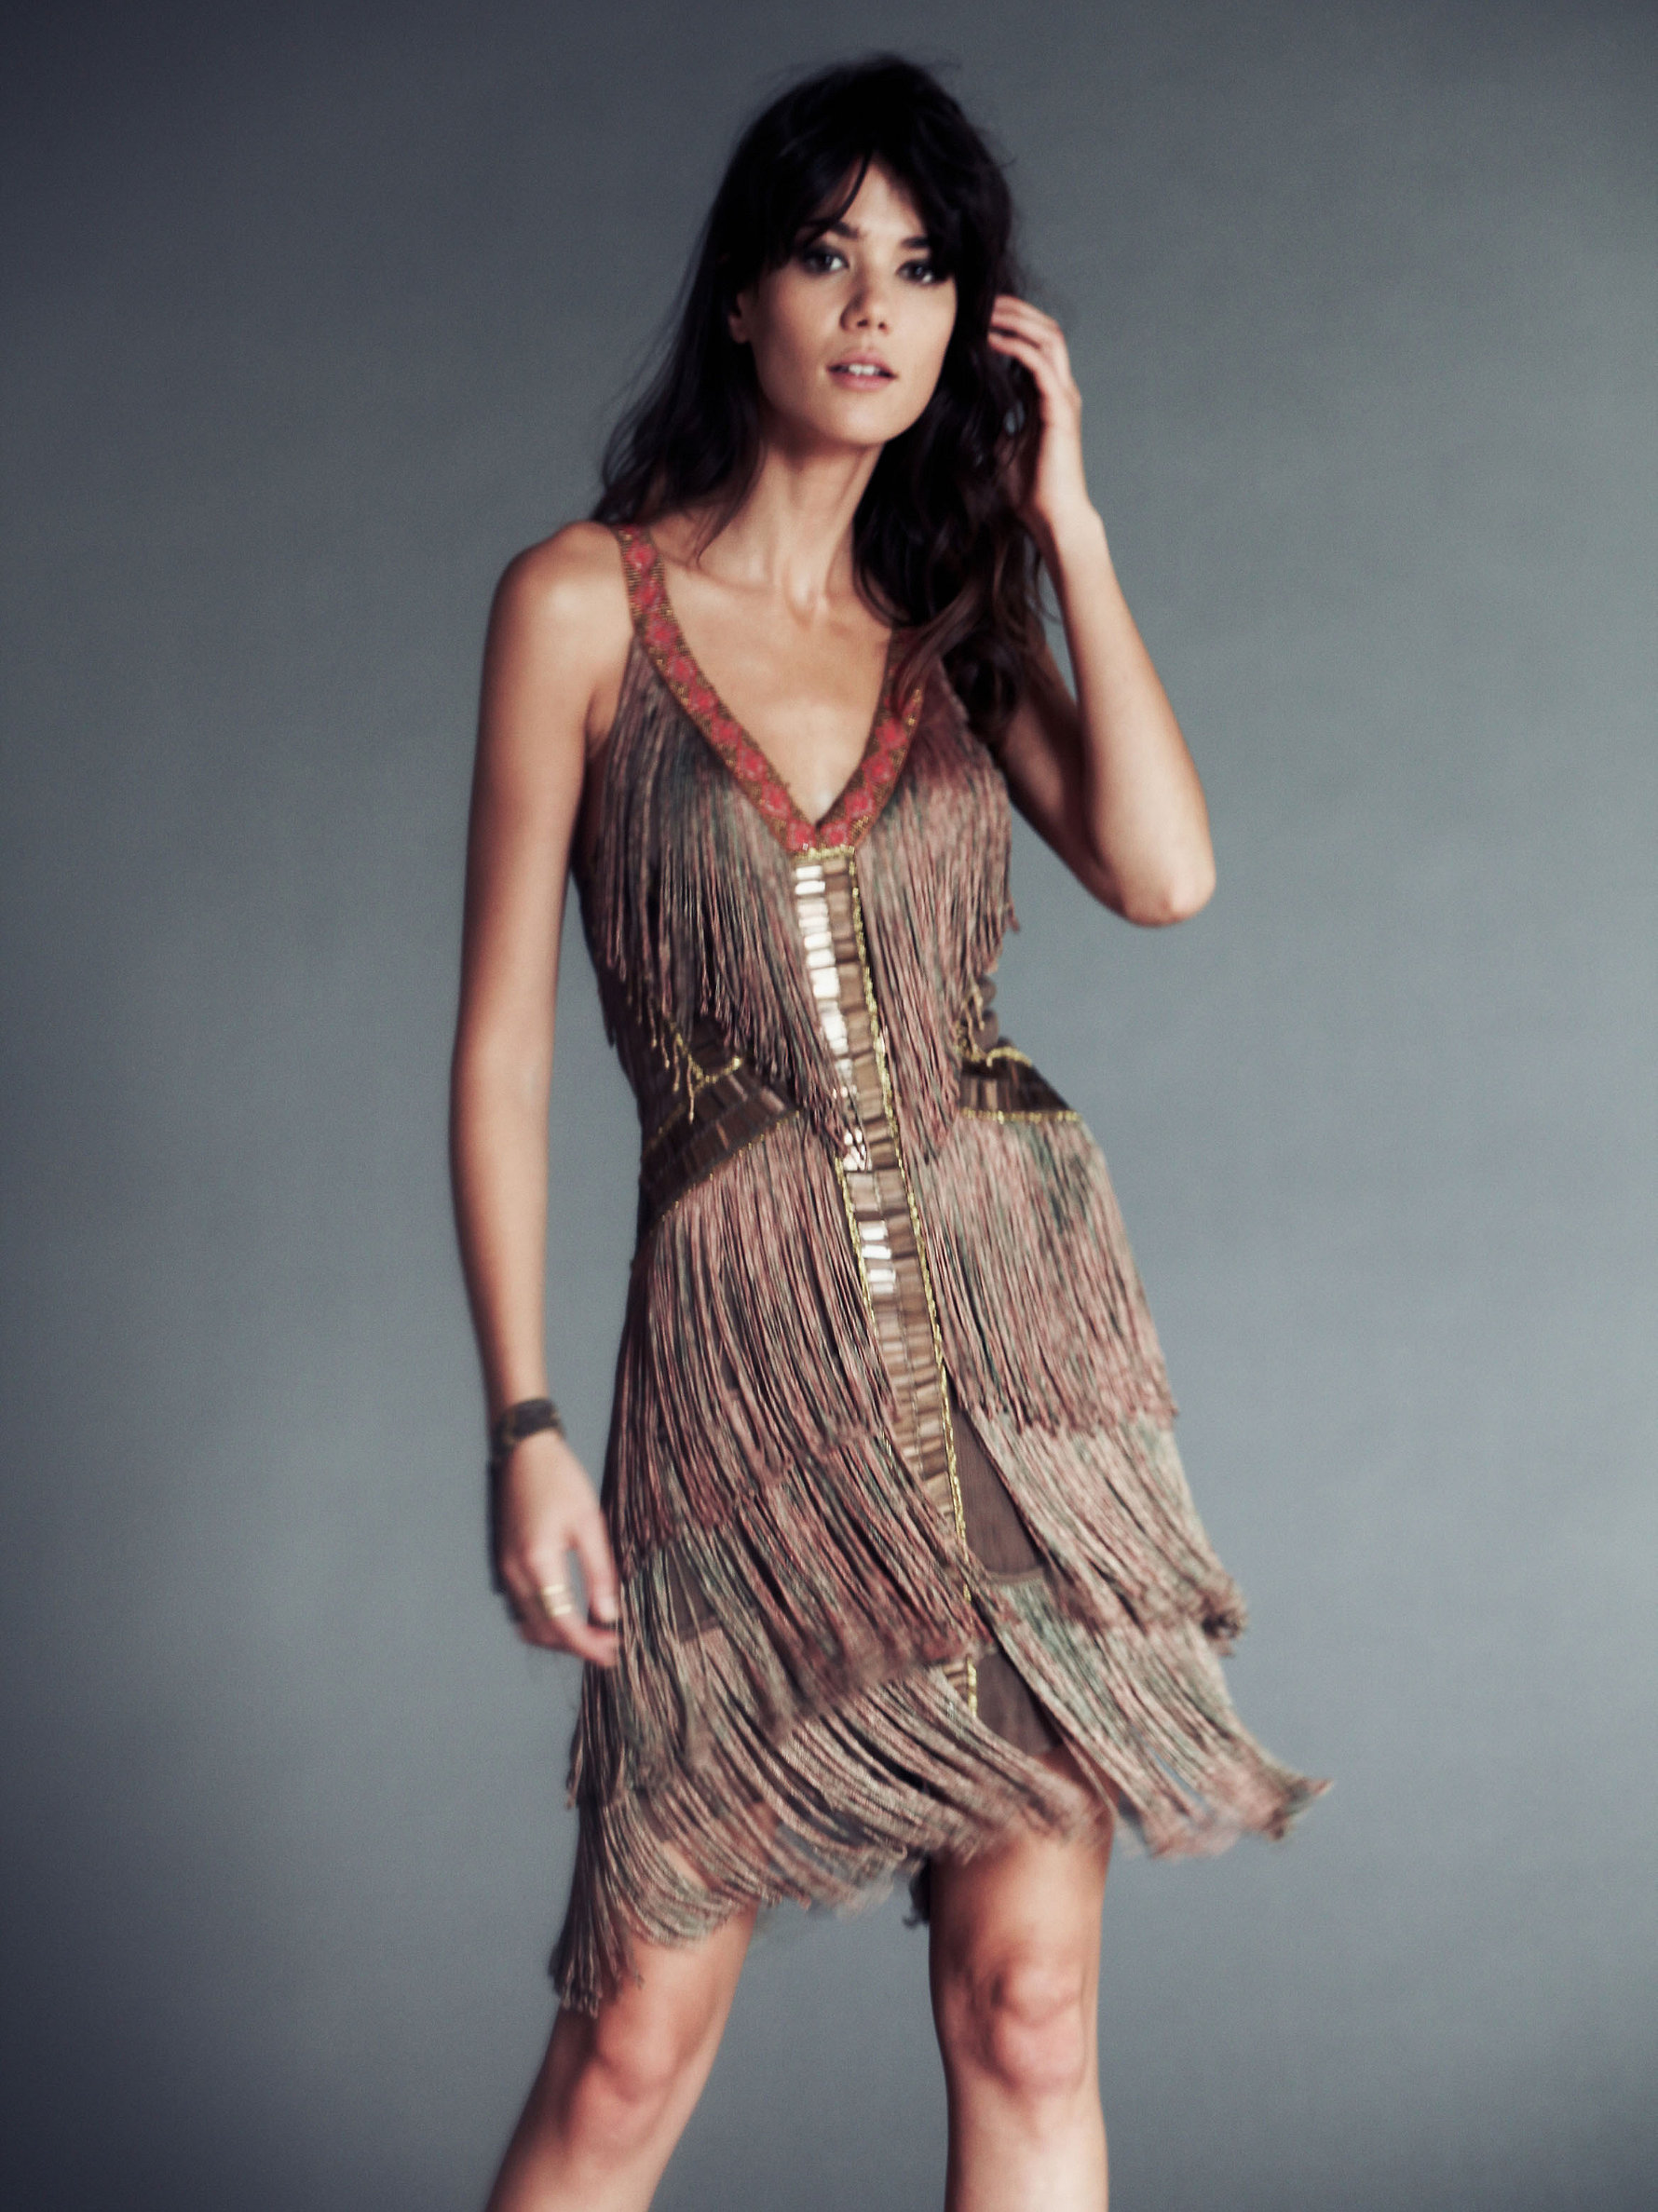 Fire Circle Fringe Dress from Free People